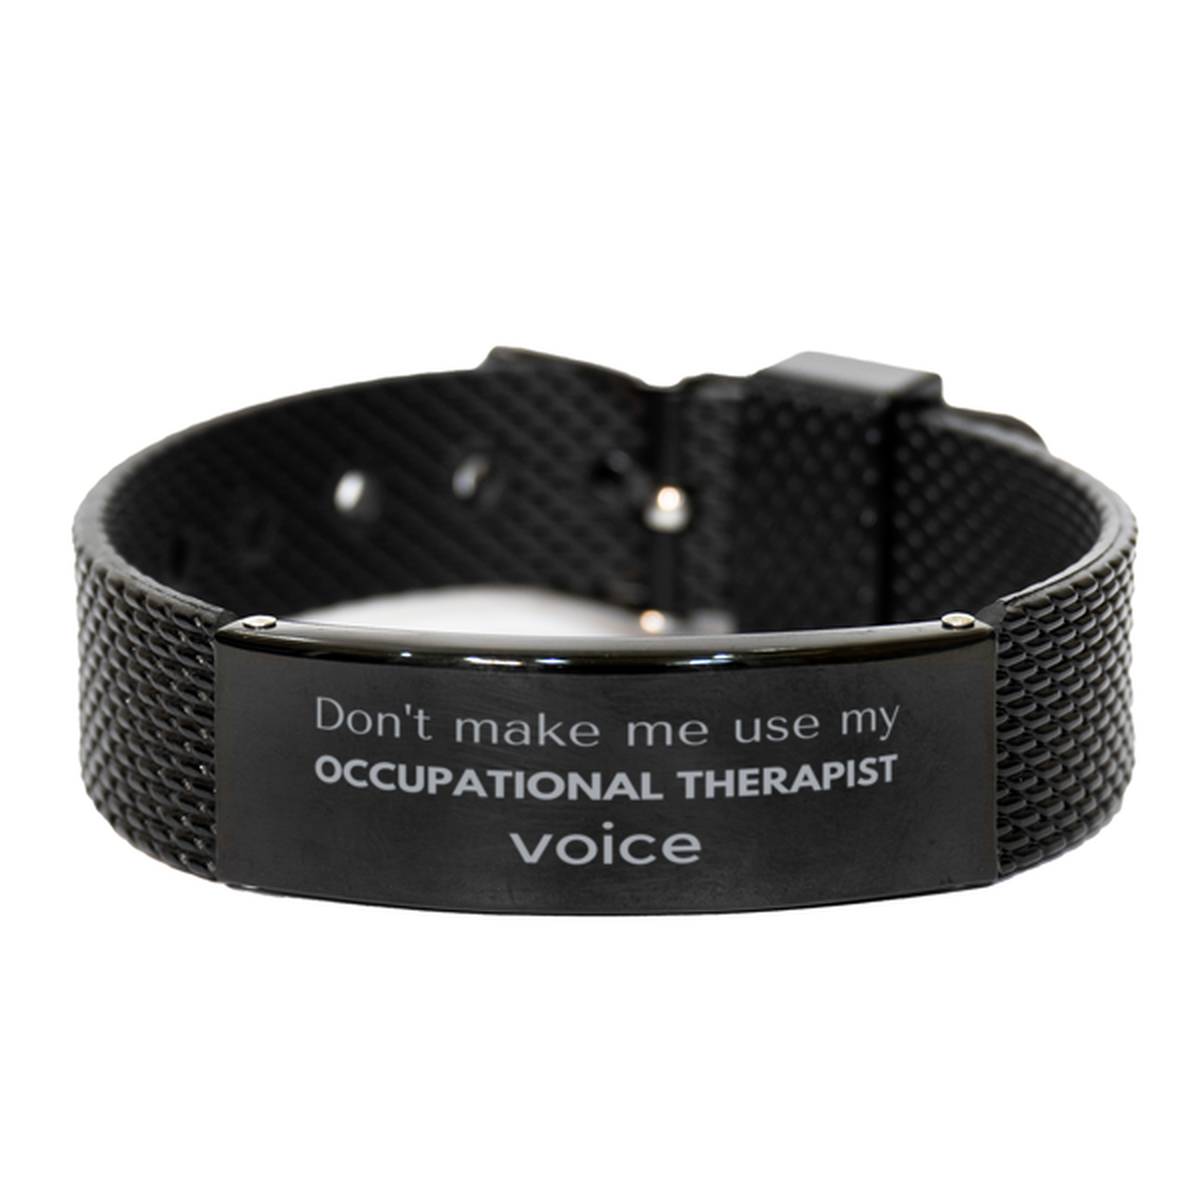 Don't make me use my Occupational Therapist voice, Sarcasm Occupational Therapist Gifts, Christmas Occupational Therapist Black Shark Mesh Bracelet Birthday Unique Gifts For Occupational Therapist Coworkers, Men, Women, Colleague, Friends